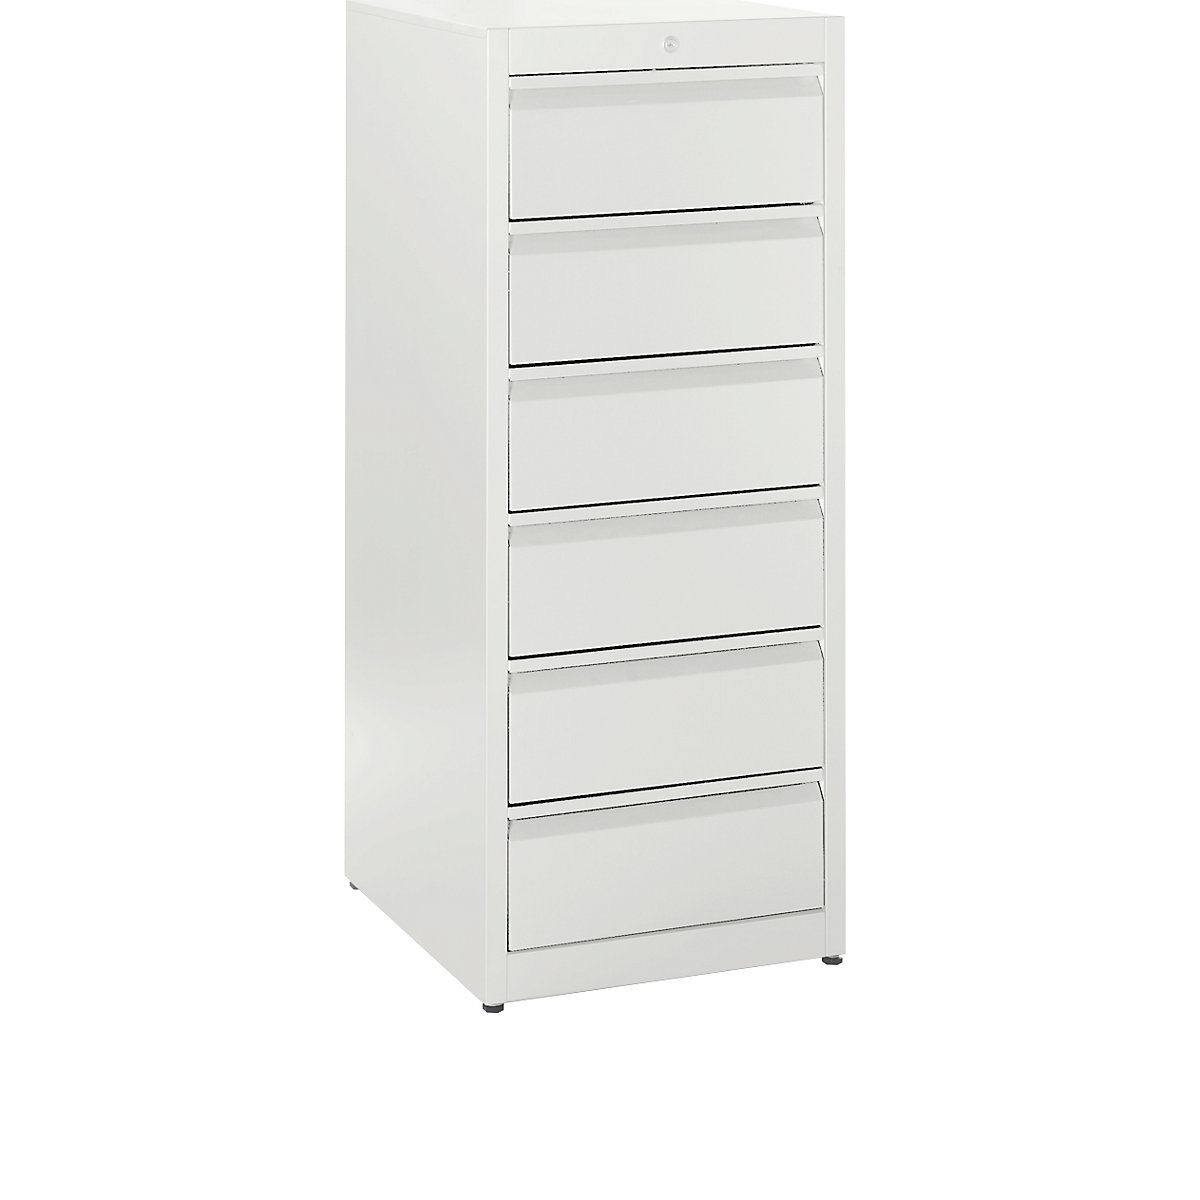 Card file cabinet, grip rails – mauser, 6 drawers, 2-track, pure white-5